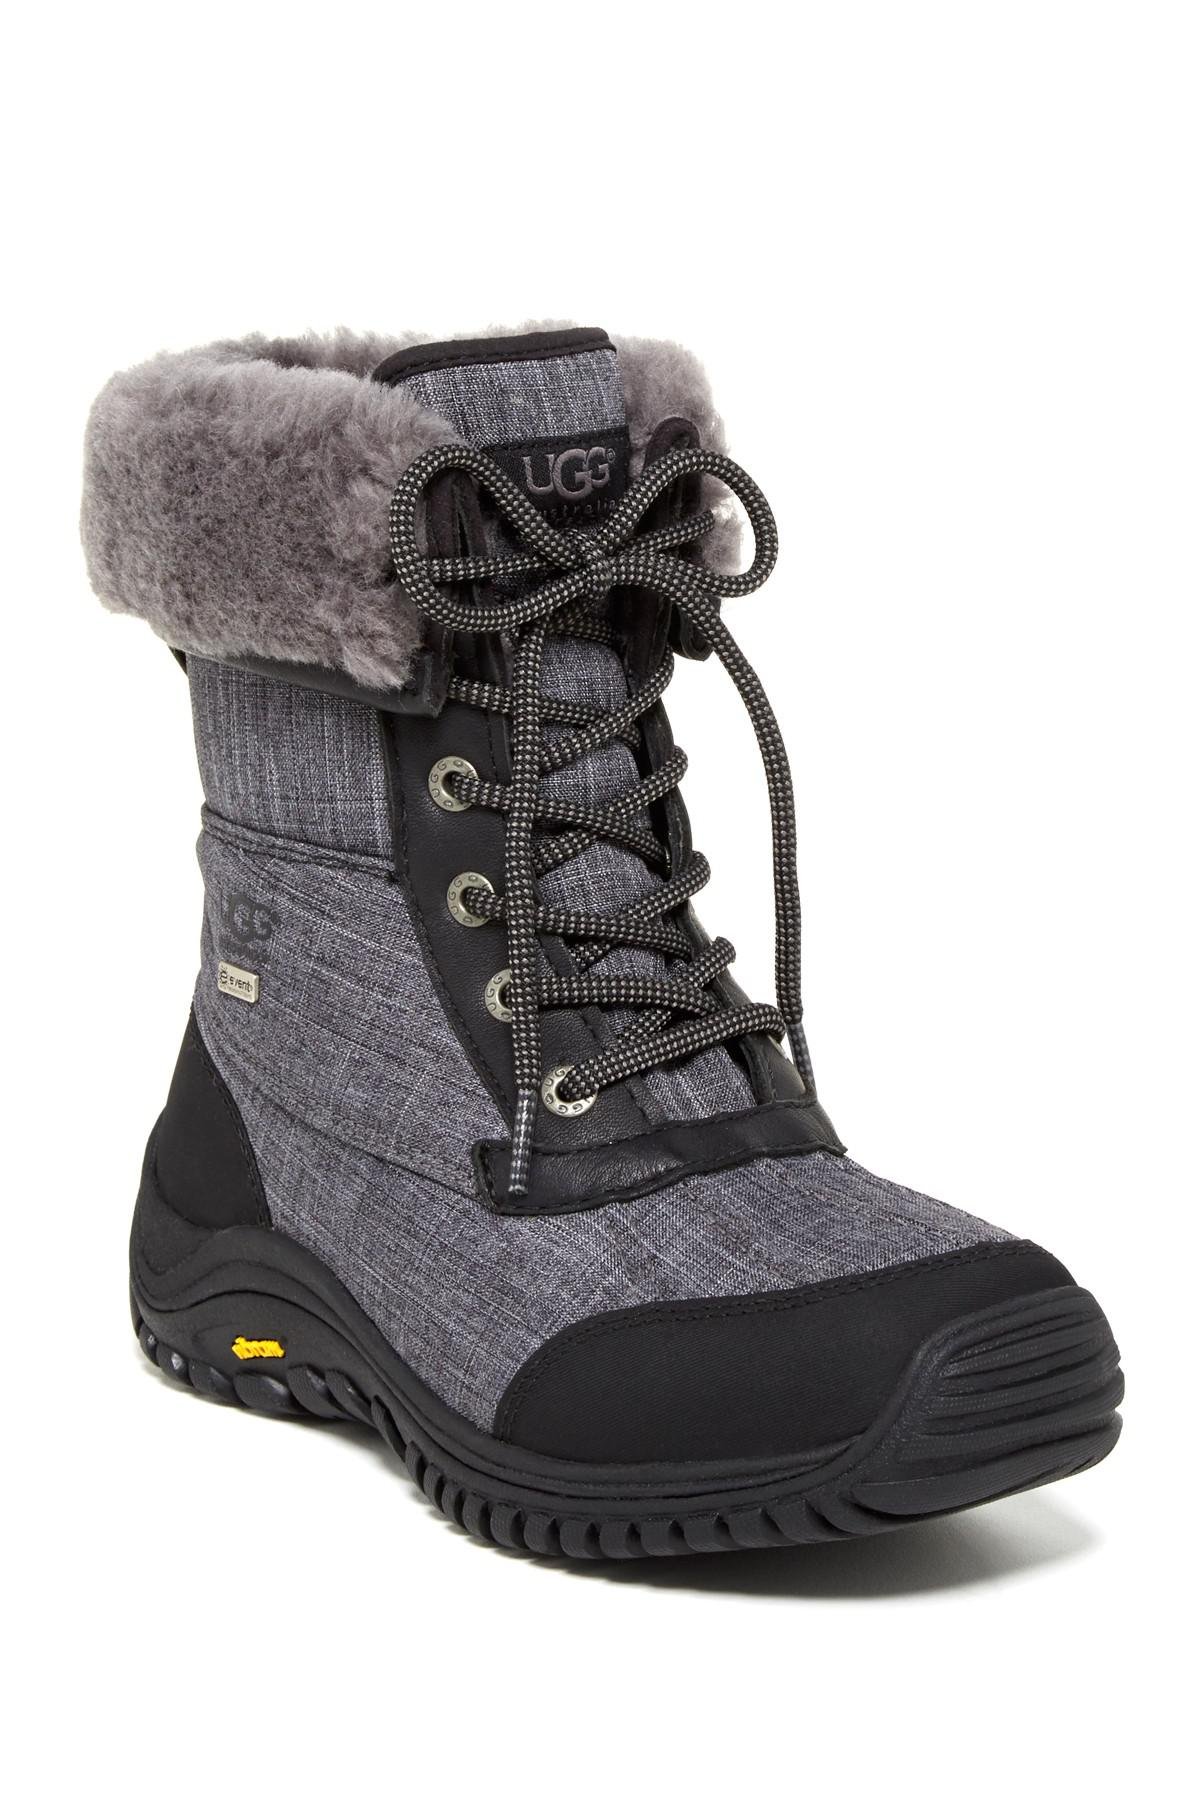 Lyst - Ugg Adirondack Uggpure(tm) Lined Water-resistant Ii Boots in Black